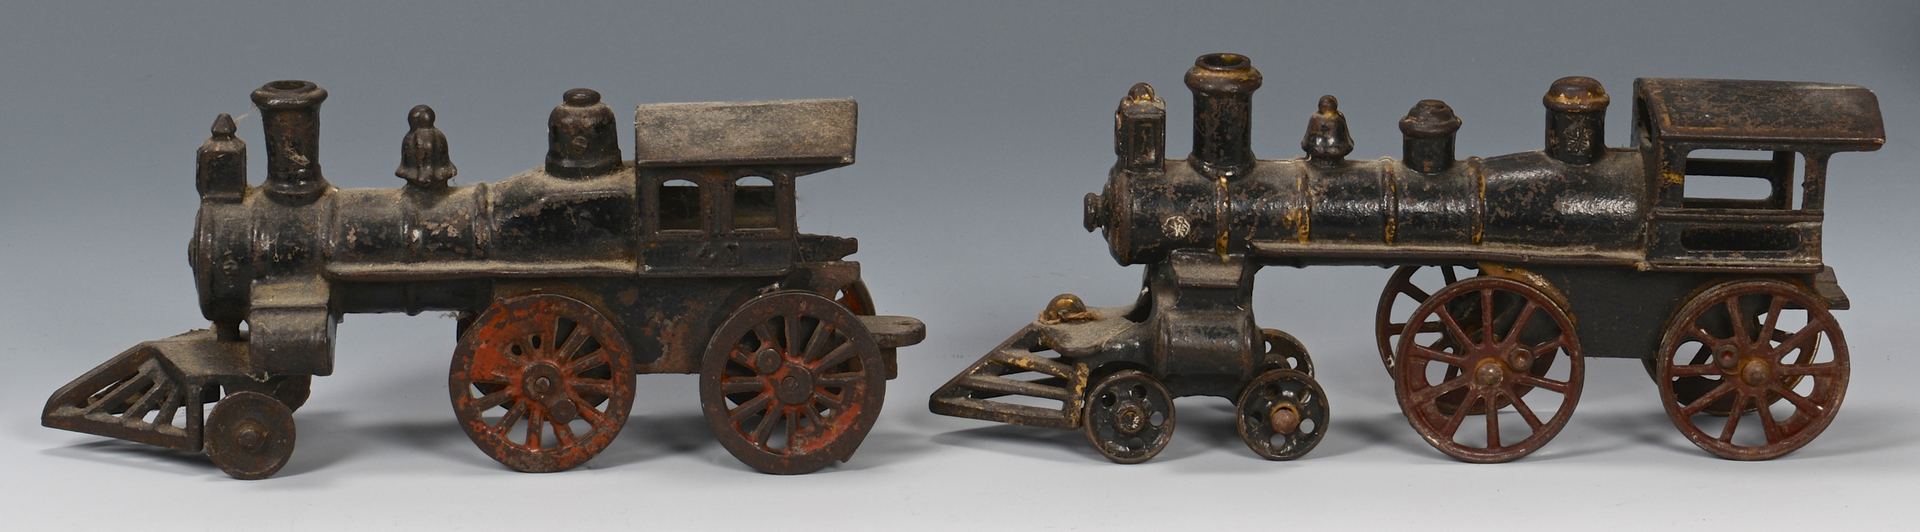 Lot 472: Group of 12 Cast Iron Trains, Cars